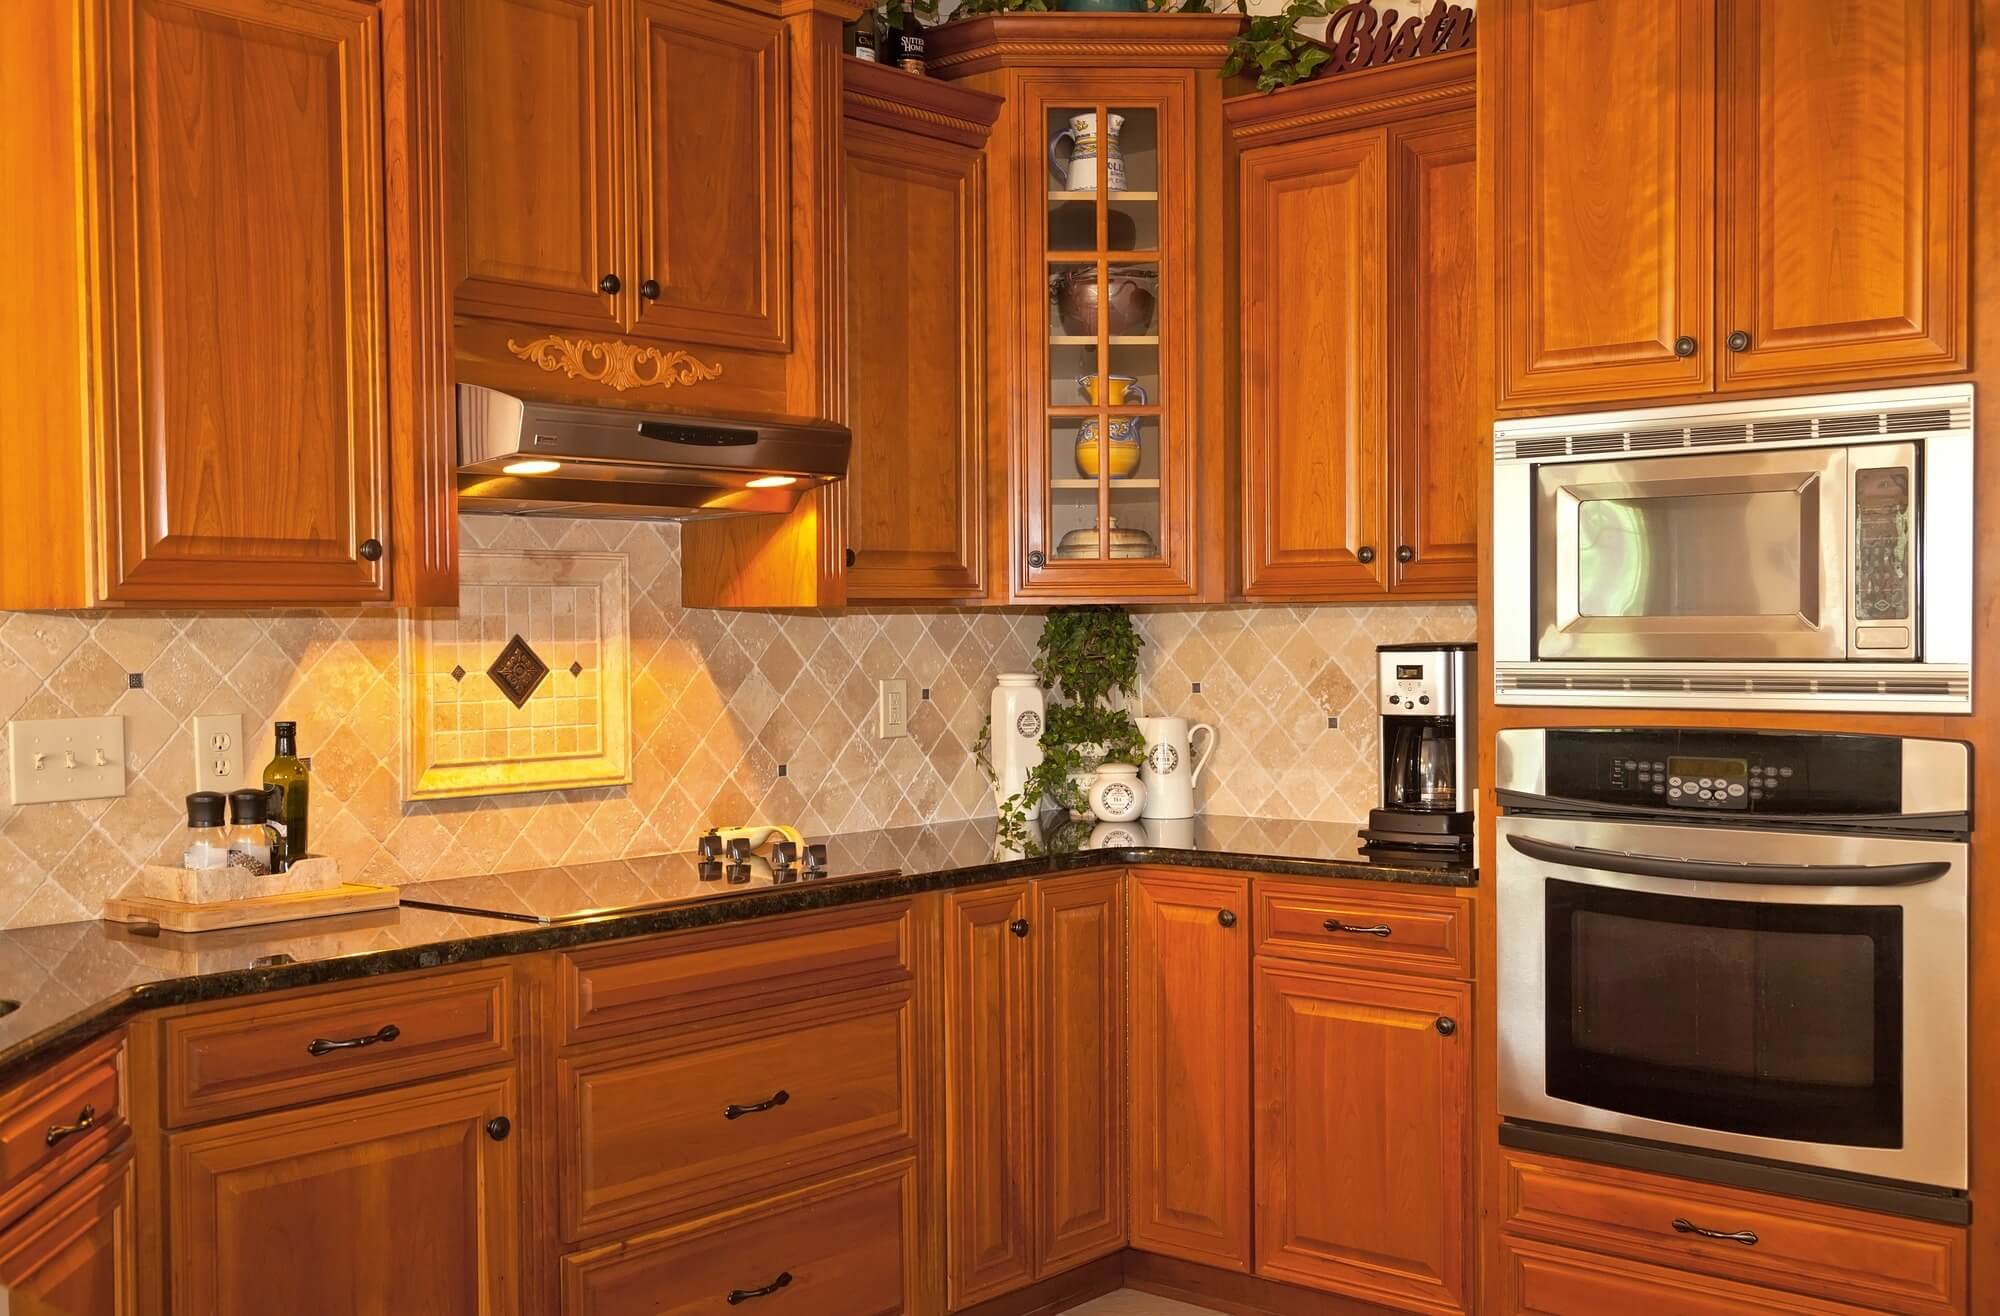 Kitchen Cabinet Dimensions Your Guide, Standard Height Kitchen Base Cabinets